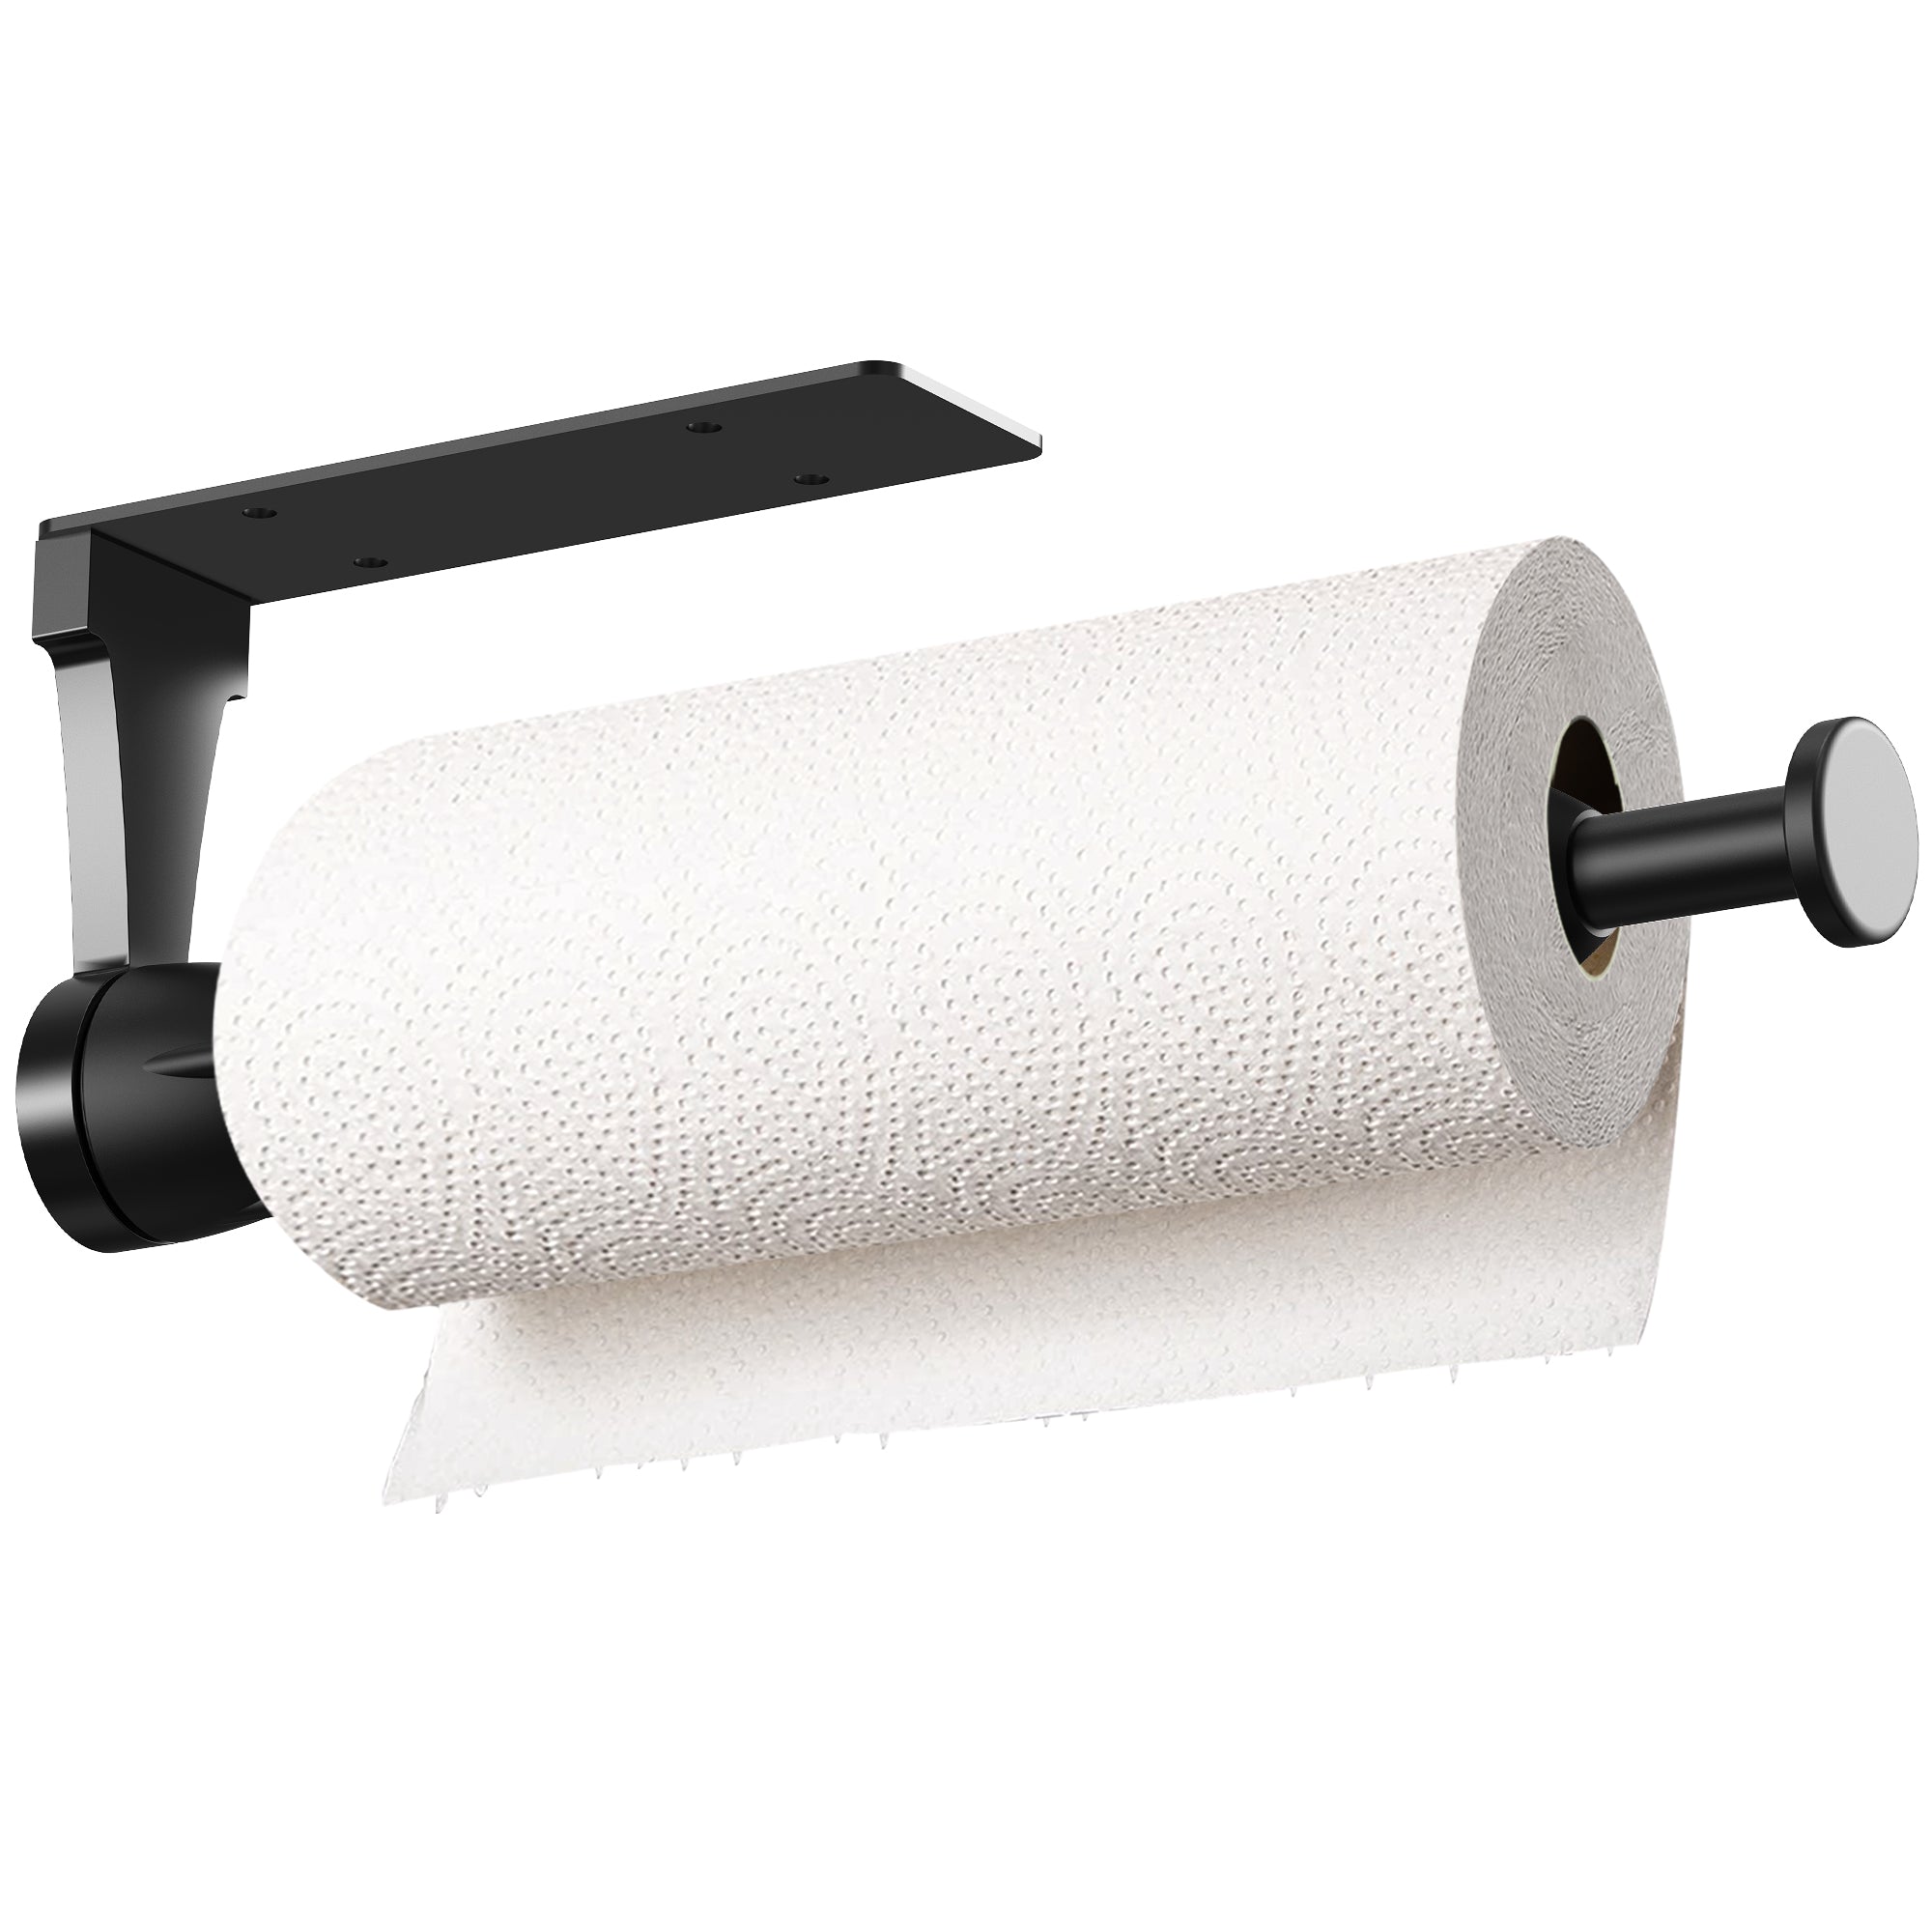 VEHHE Toilet Paper Holder with Storage Box Easy to Tear Paper off